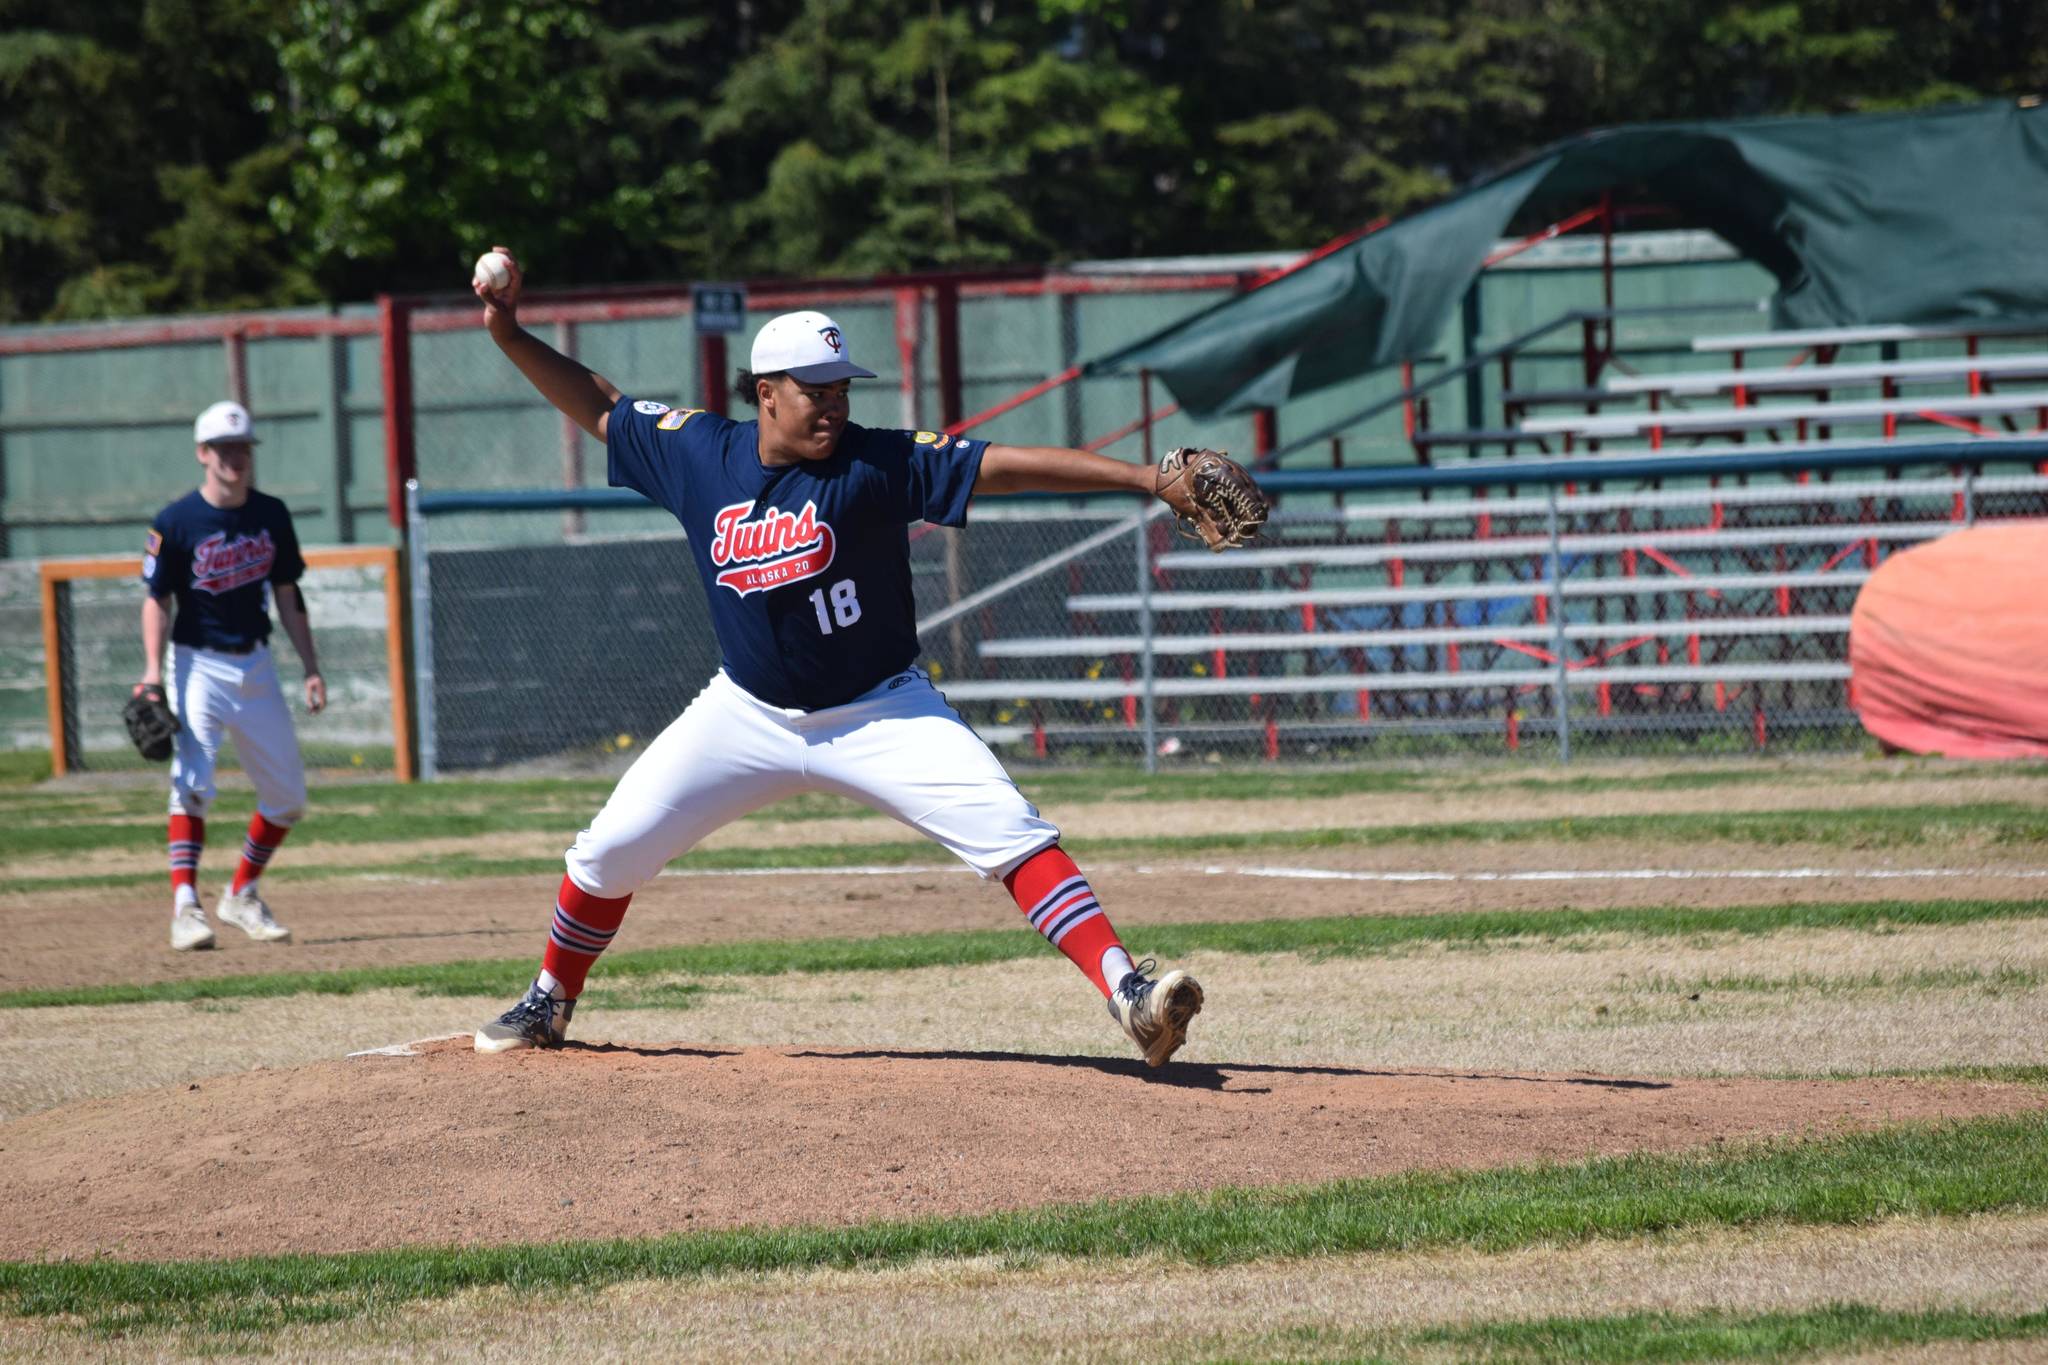 Atticus Gibson fires off a pitch during Kenai’s league game against East Anchorage at Oiler Park on Sunday, June 13, 2021. (Camille Botello / Peninsula Clarion)